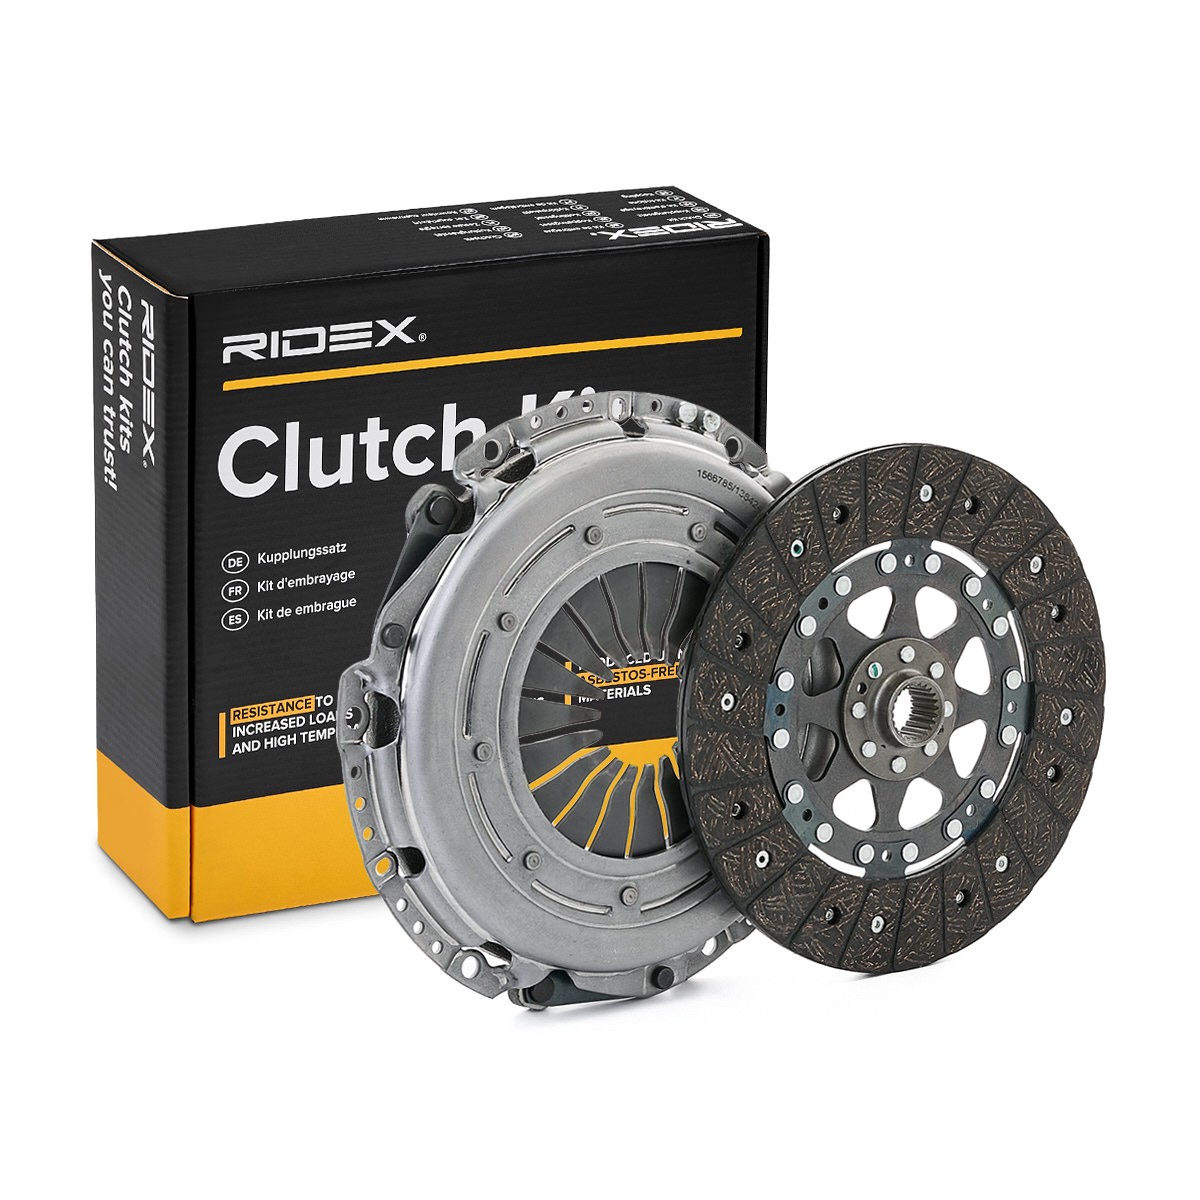 RIDEX 479C0195 Clutch kit for engines with dual-mass flywheel, with clutch pressure plate, with clutch disc, without clutch release bearing, Requires special tools for mounting, Check and replace dual-mass flywheel if necessary., with automatic adjustment, 240mm